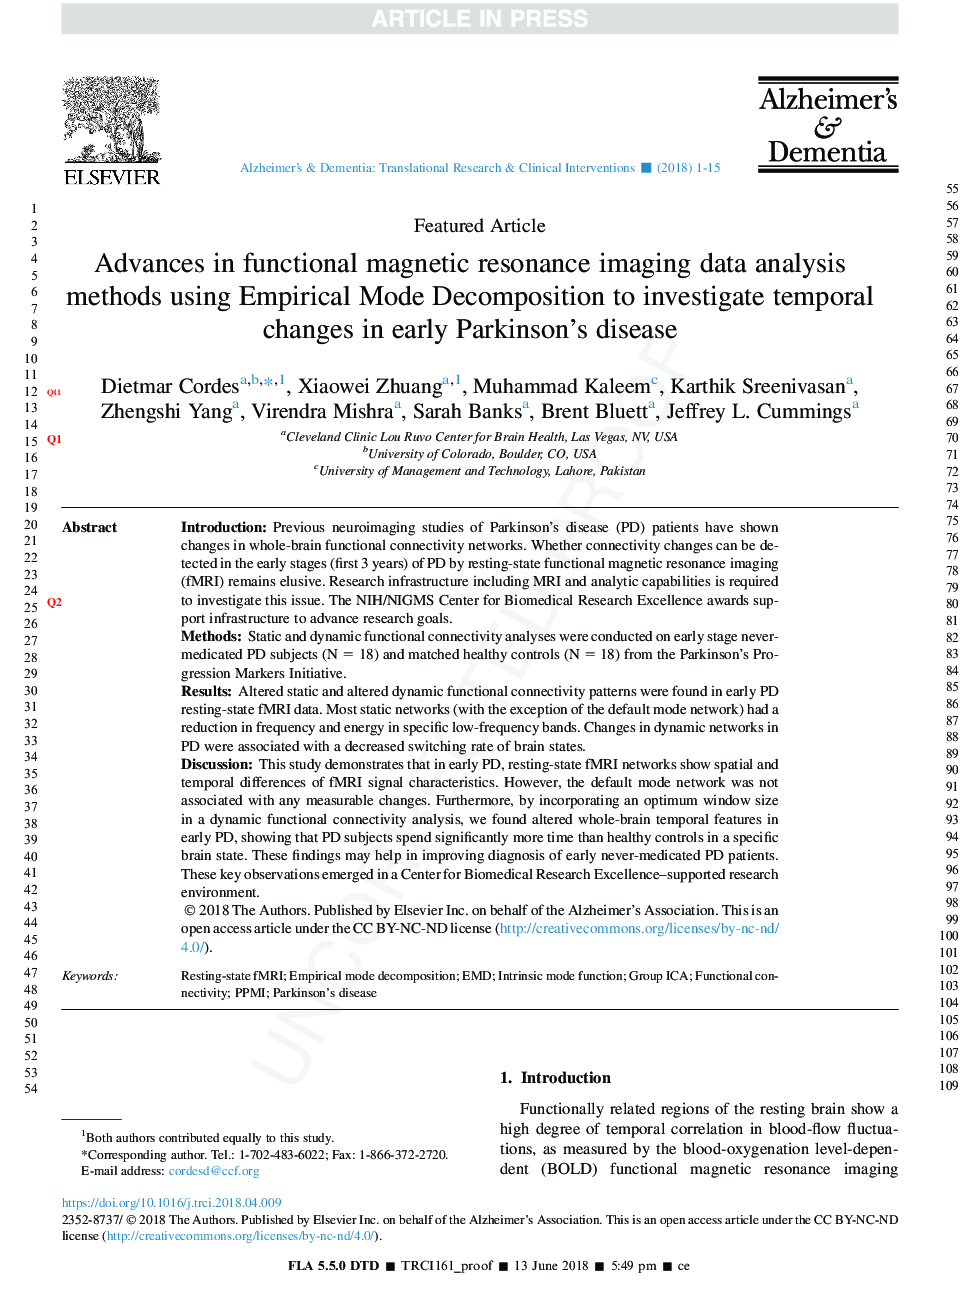 Advances in functional magnetic resonance imaging data analysis methods using Empirical Mode Decomposition to investigate temporal changes in early Parkinson's disease